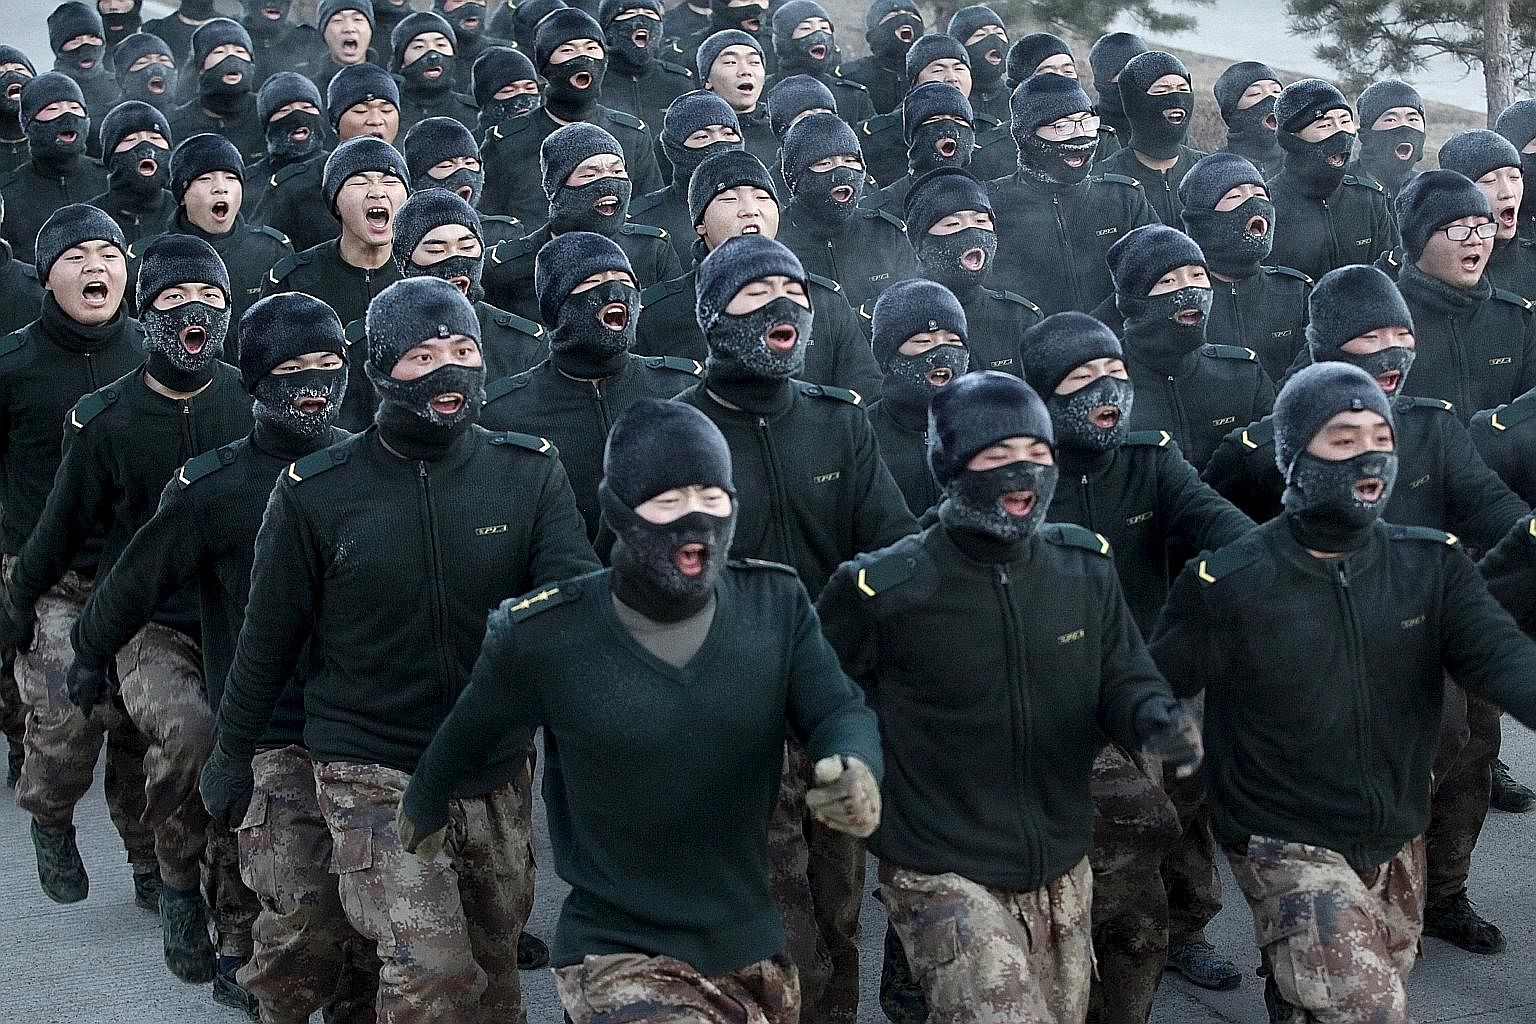 People's Liberation Army recruits shout slogans as they march during a training session in cold winter temperatures at a military base in China's Heilongjiang province. President Xi is pushing on with tough military reforms and an anti-corruption dri